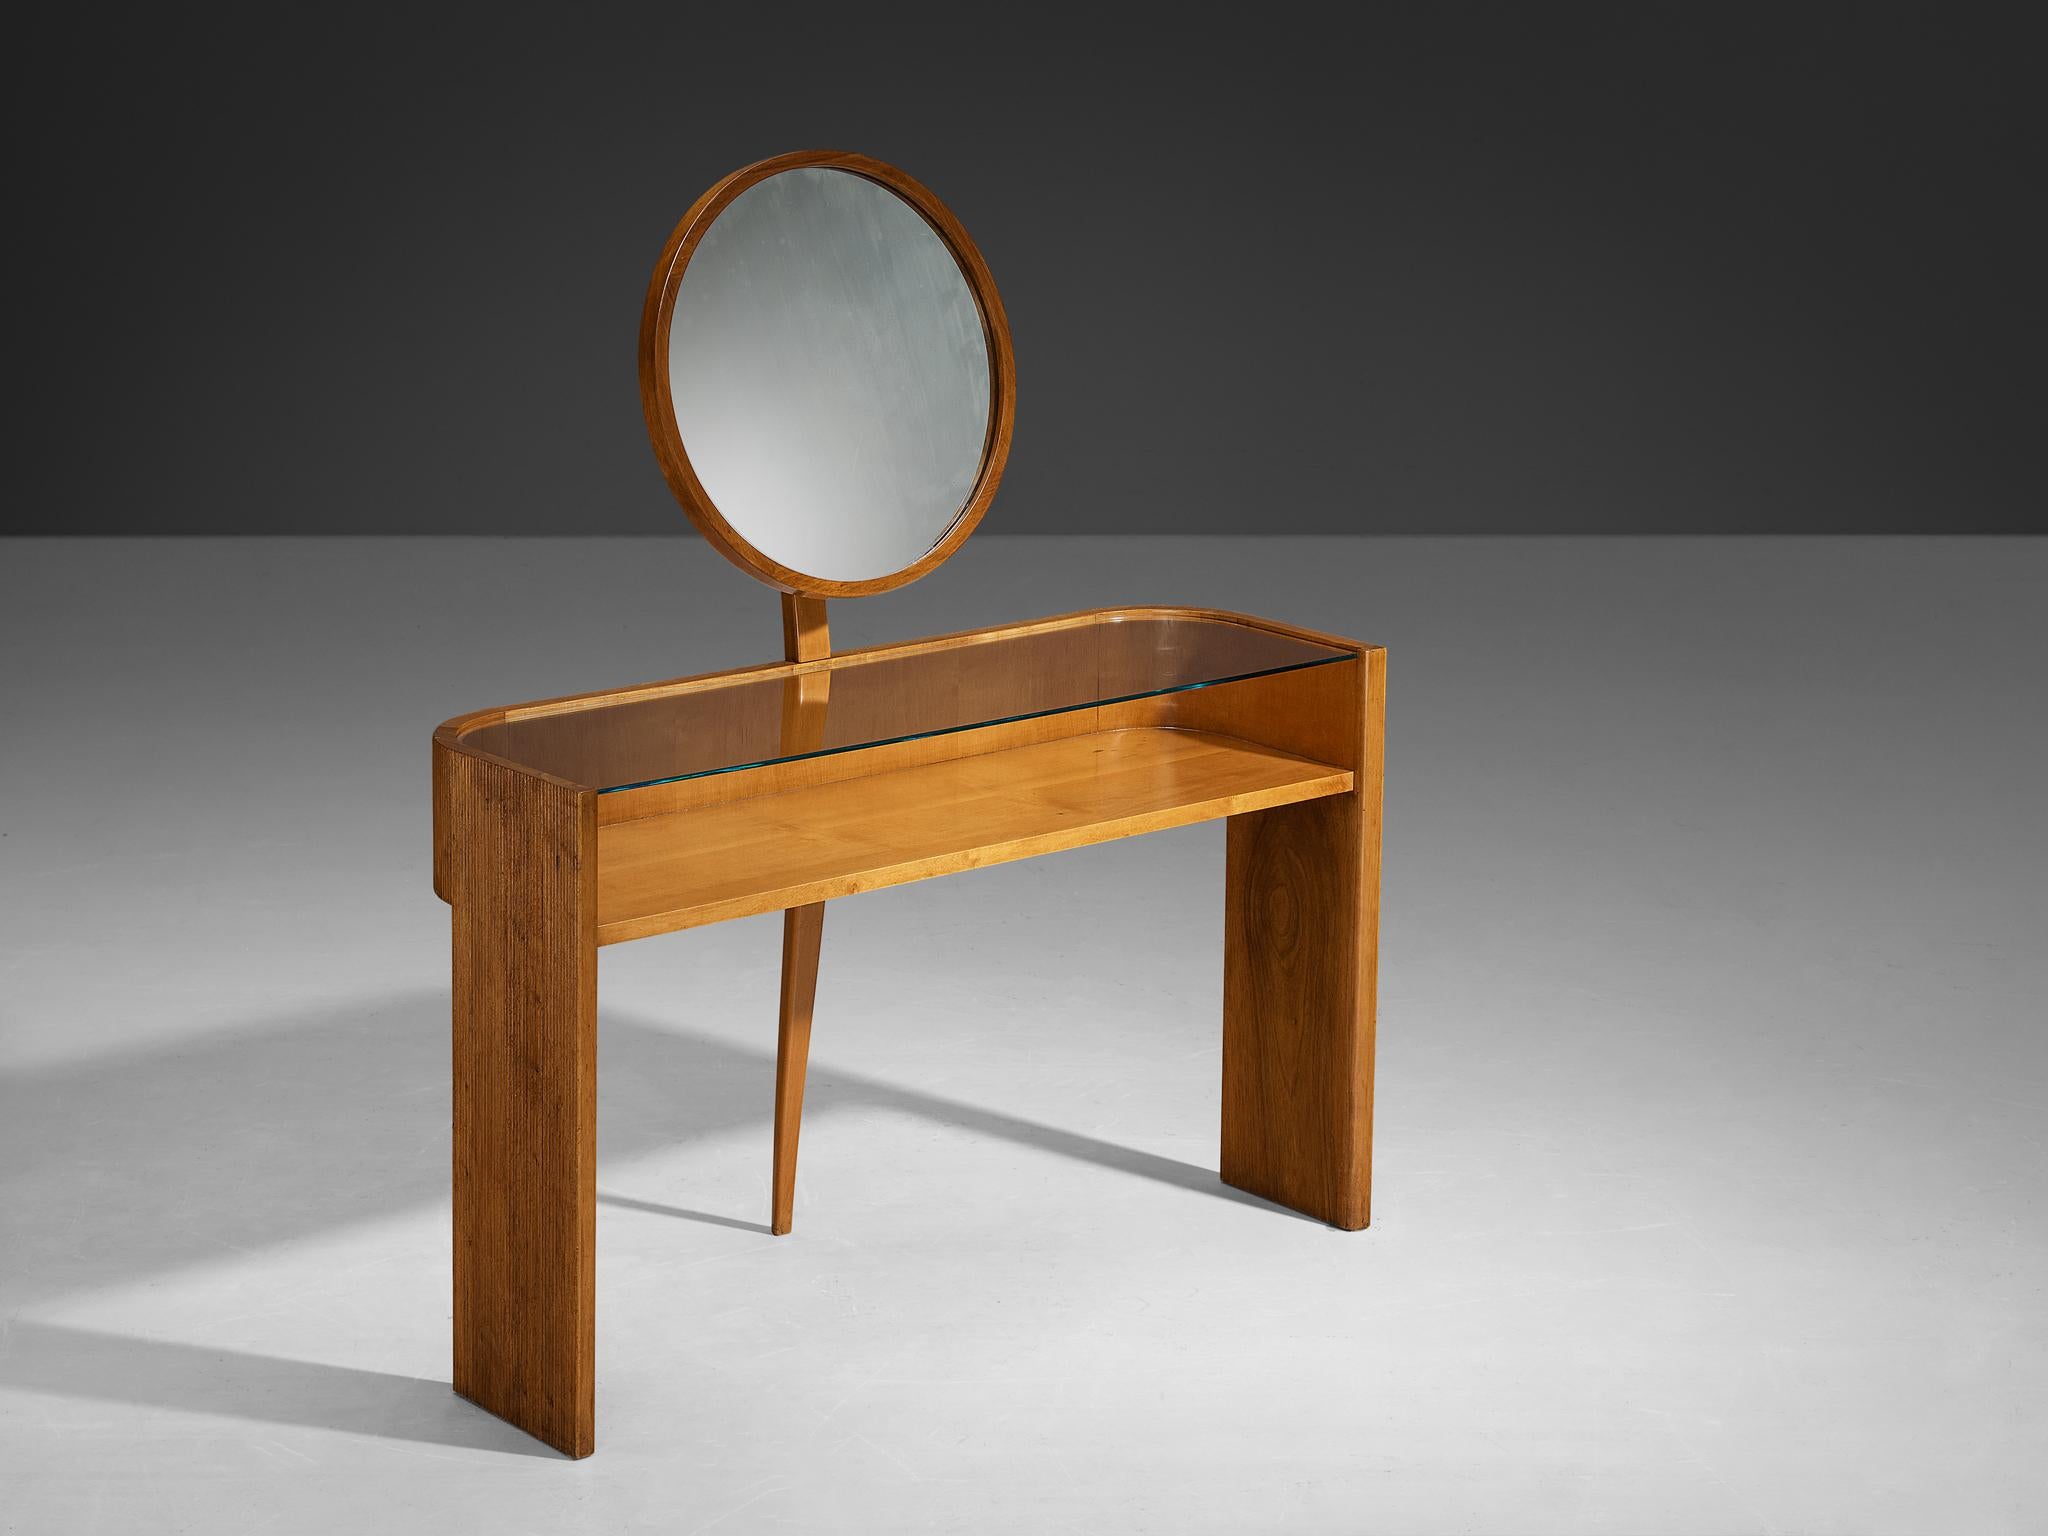 Vanity table, walnut, mirrored glass, brass, Italy, 1930s

Made in Italy, this vanity table is designed according to the Art Deco design principles that were in vogue in the thirties. The dressing table bears witness to the designer's excellent